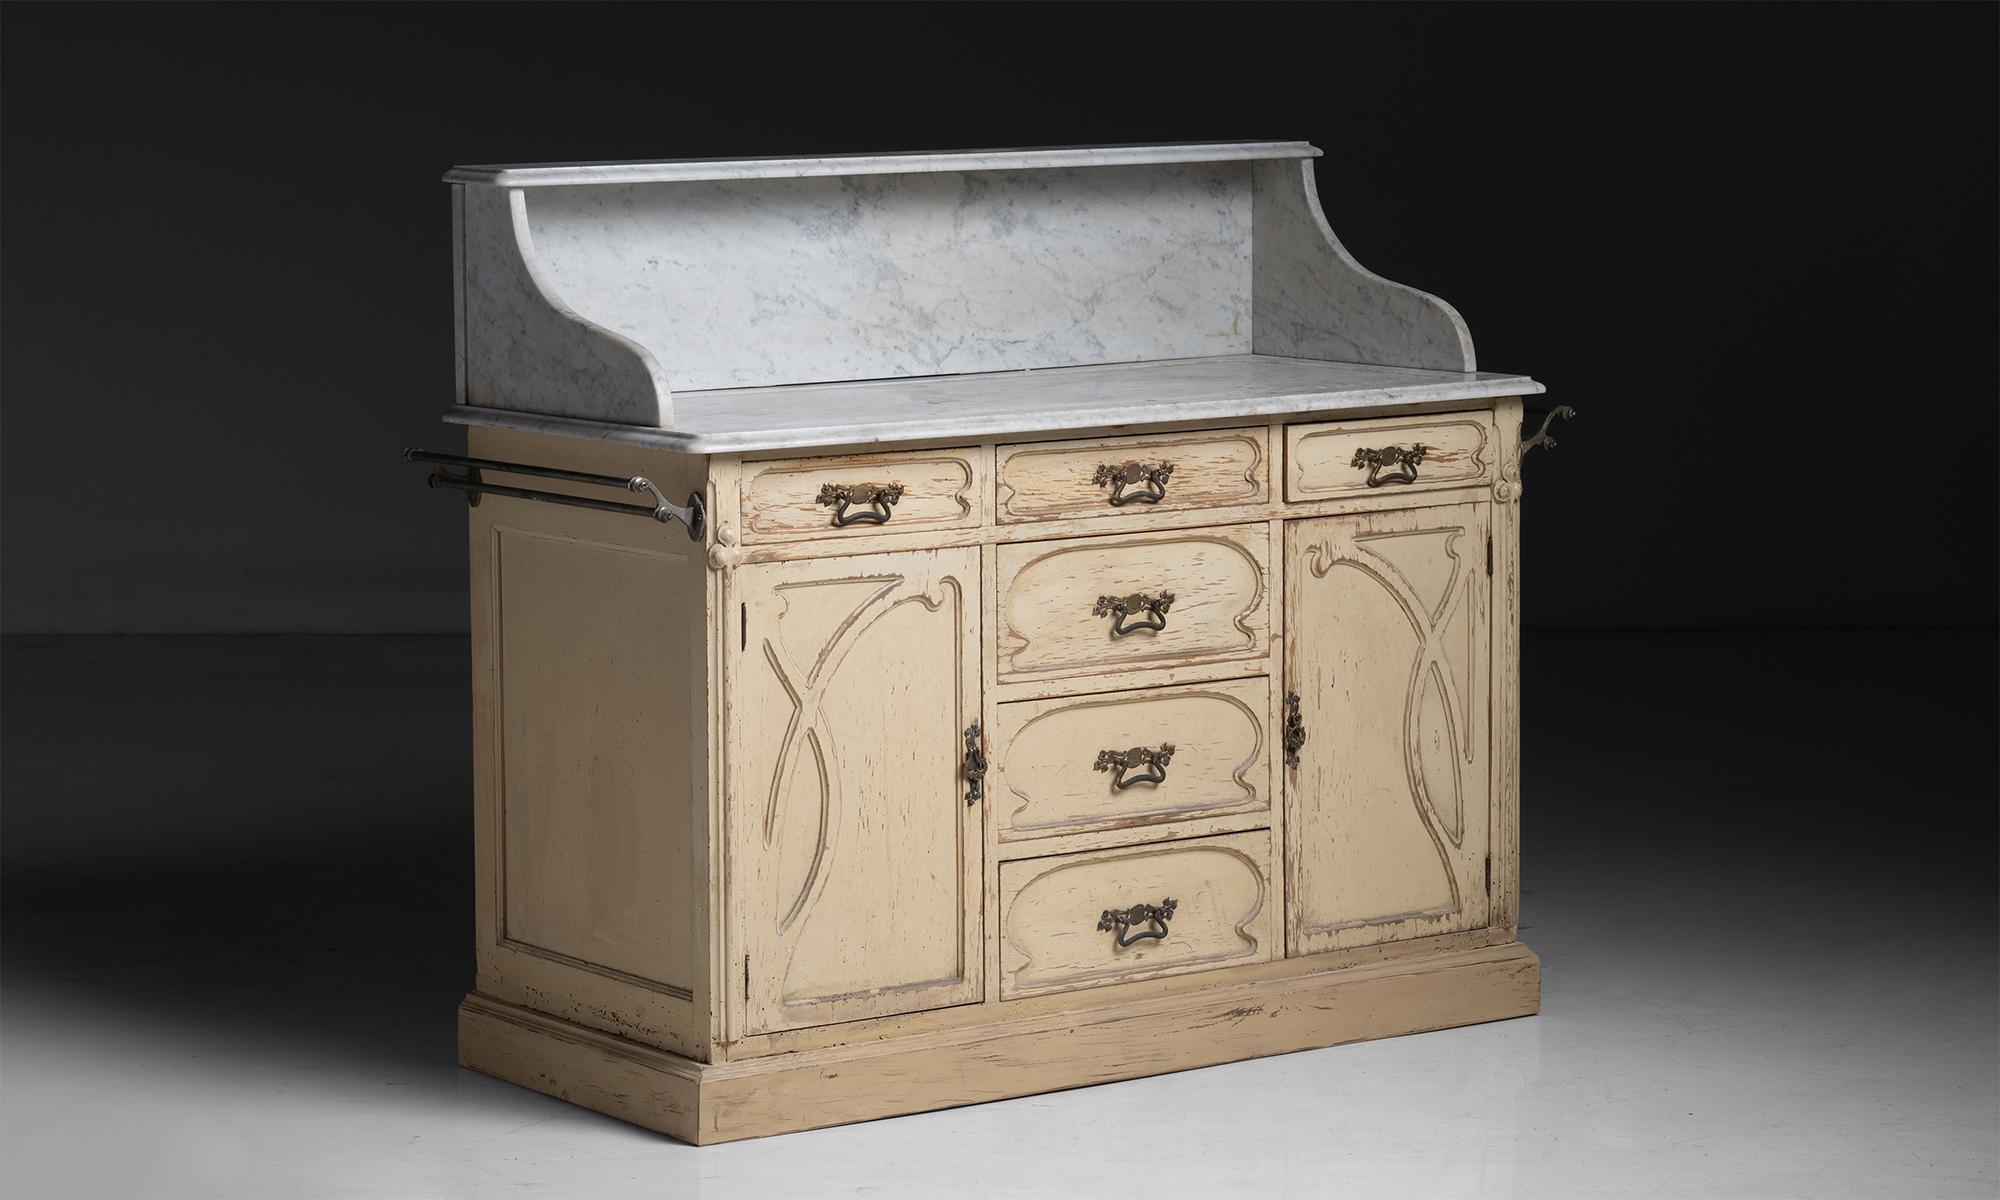 Art Nouveau Wash Stand

England circa 1890

Marble top with decorative carving, original paint, and copper railing.

Measures 57.75”w x 24”d x 45.75”h x 33.5” surface height